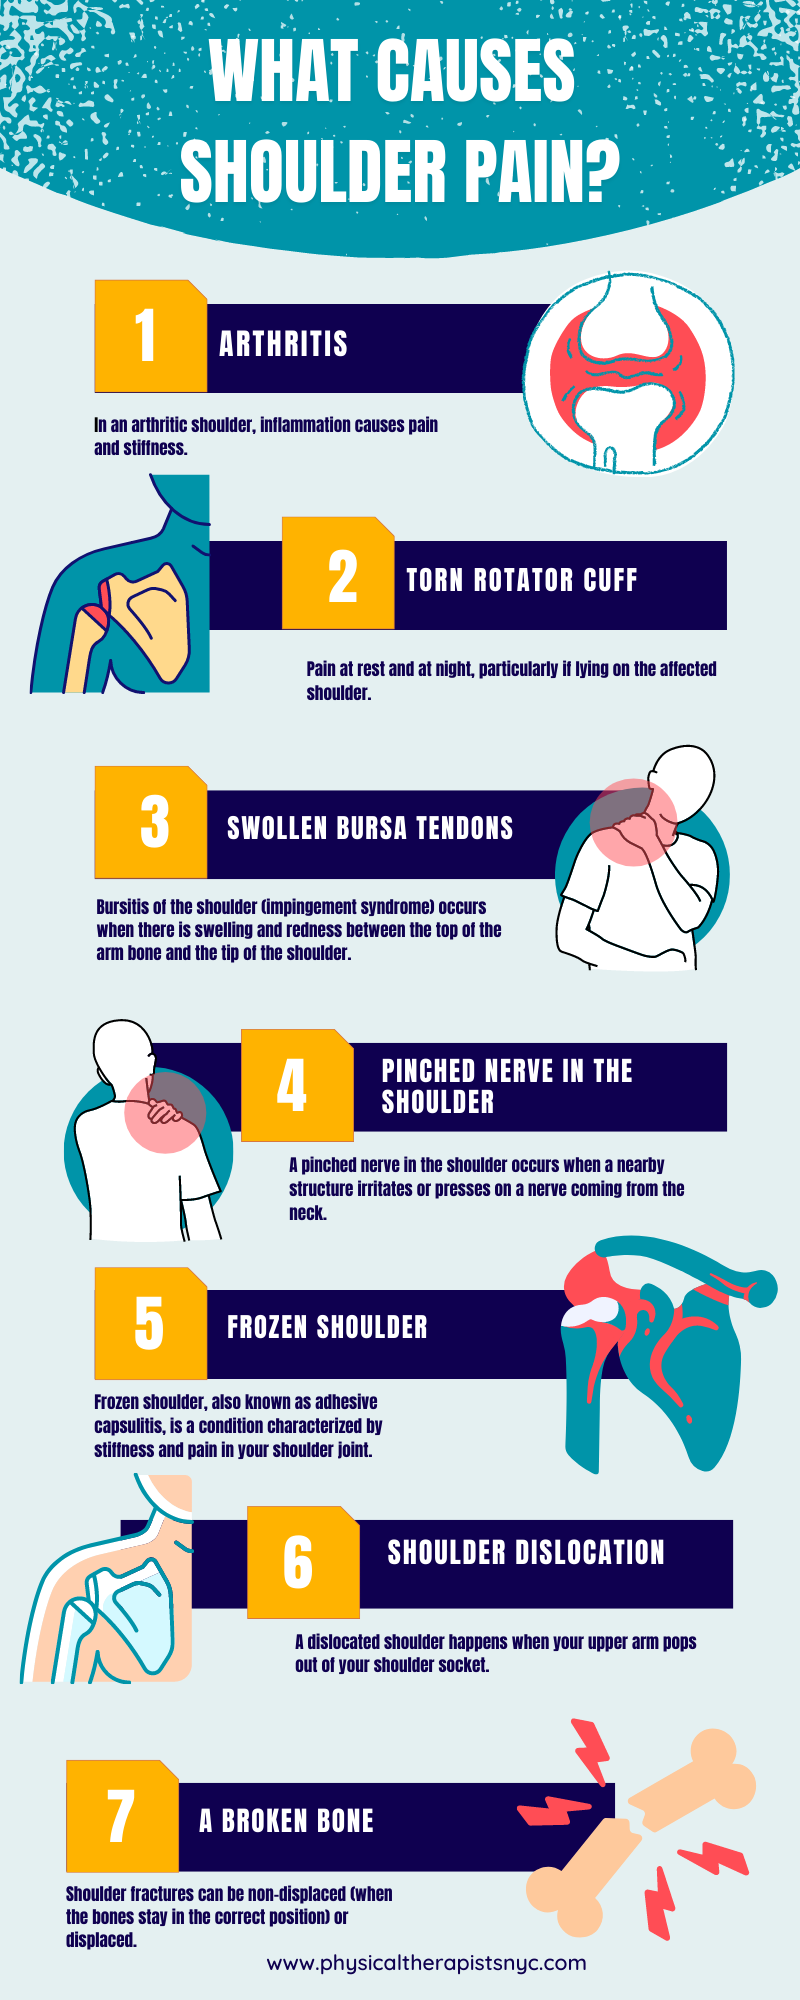 What causes shoulder pain